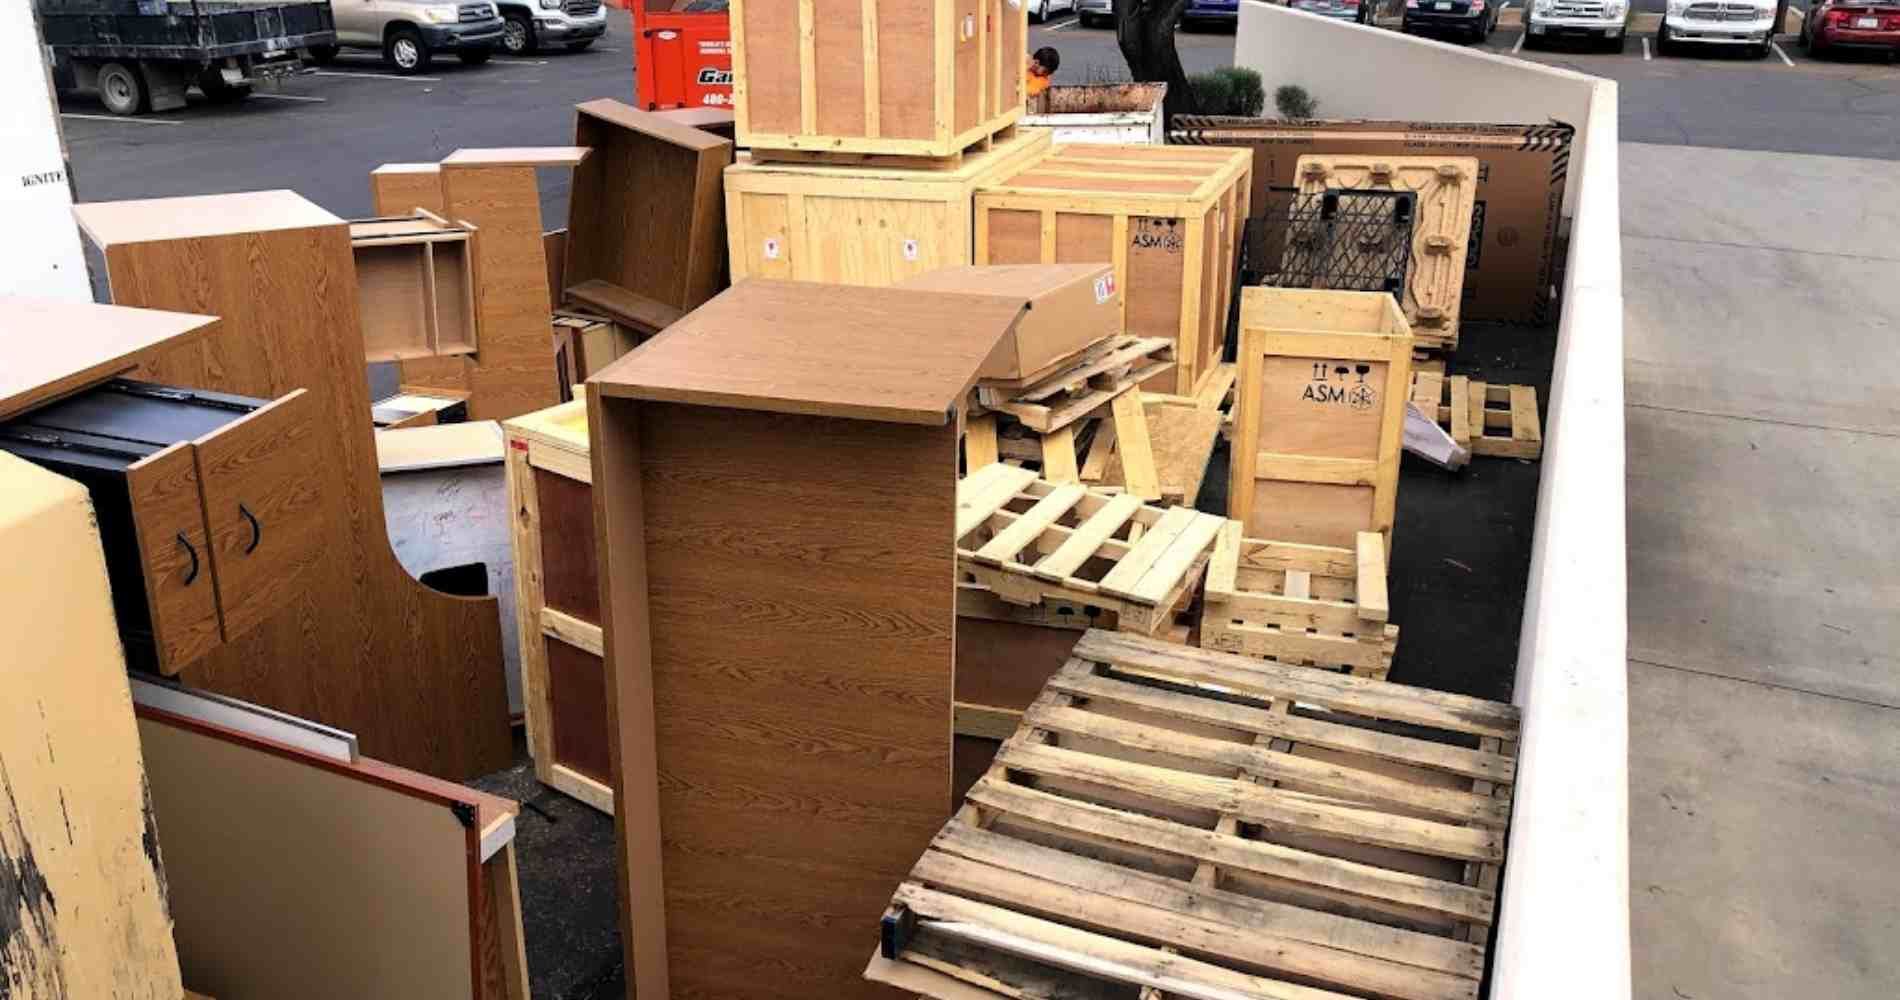 #1 for Pallet Disposal in Phoenix, AZ With Over 1200 5-Star Reviews!